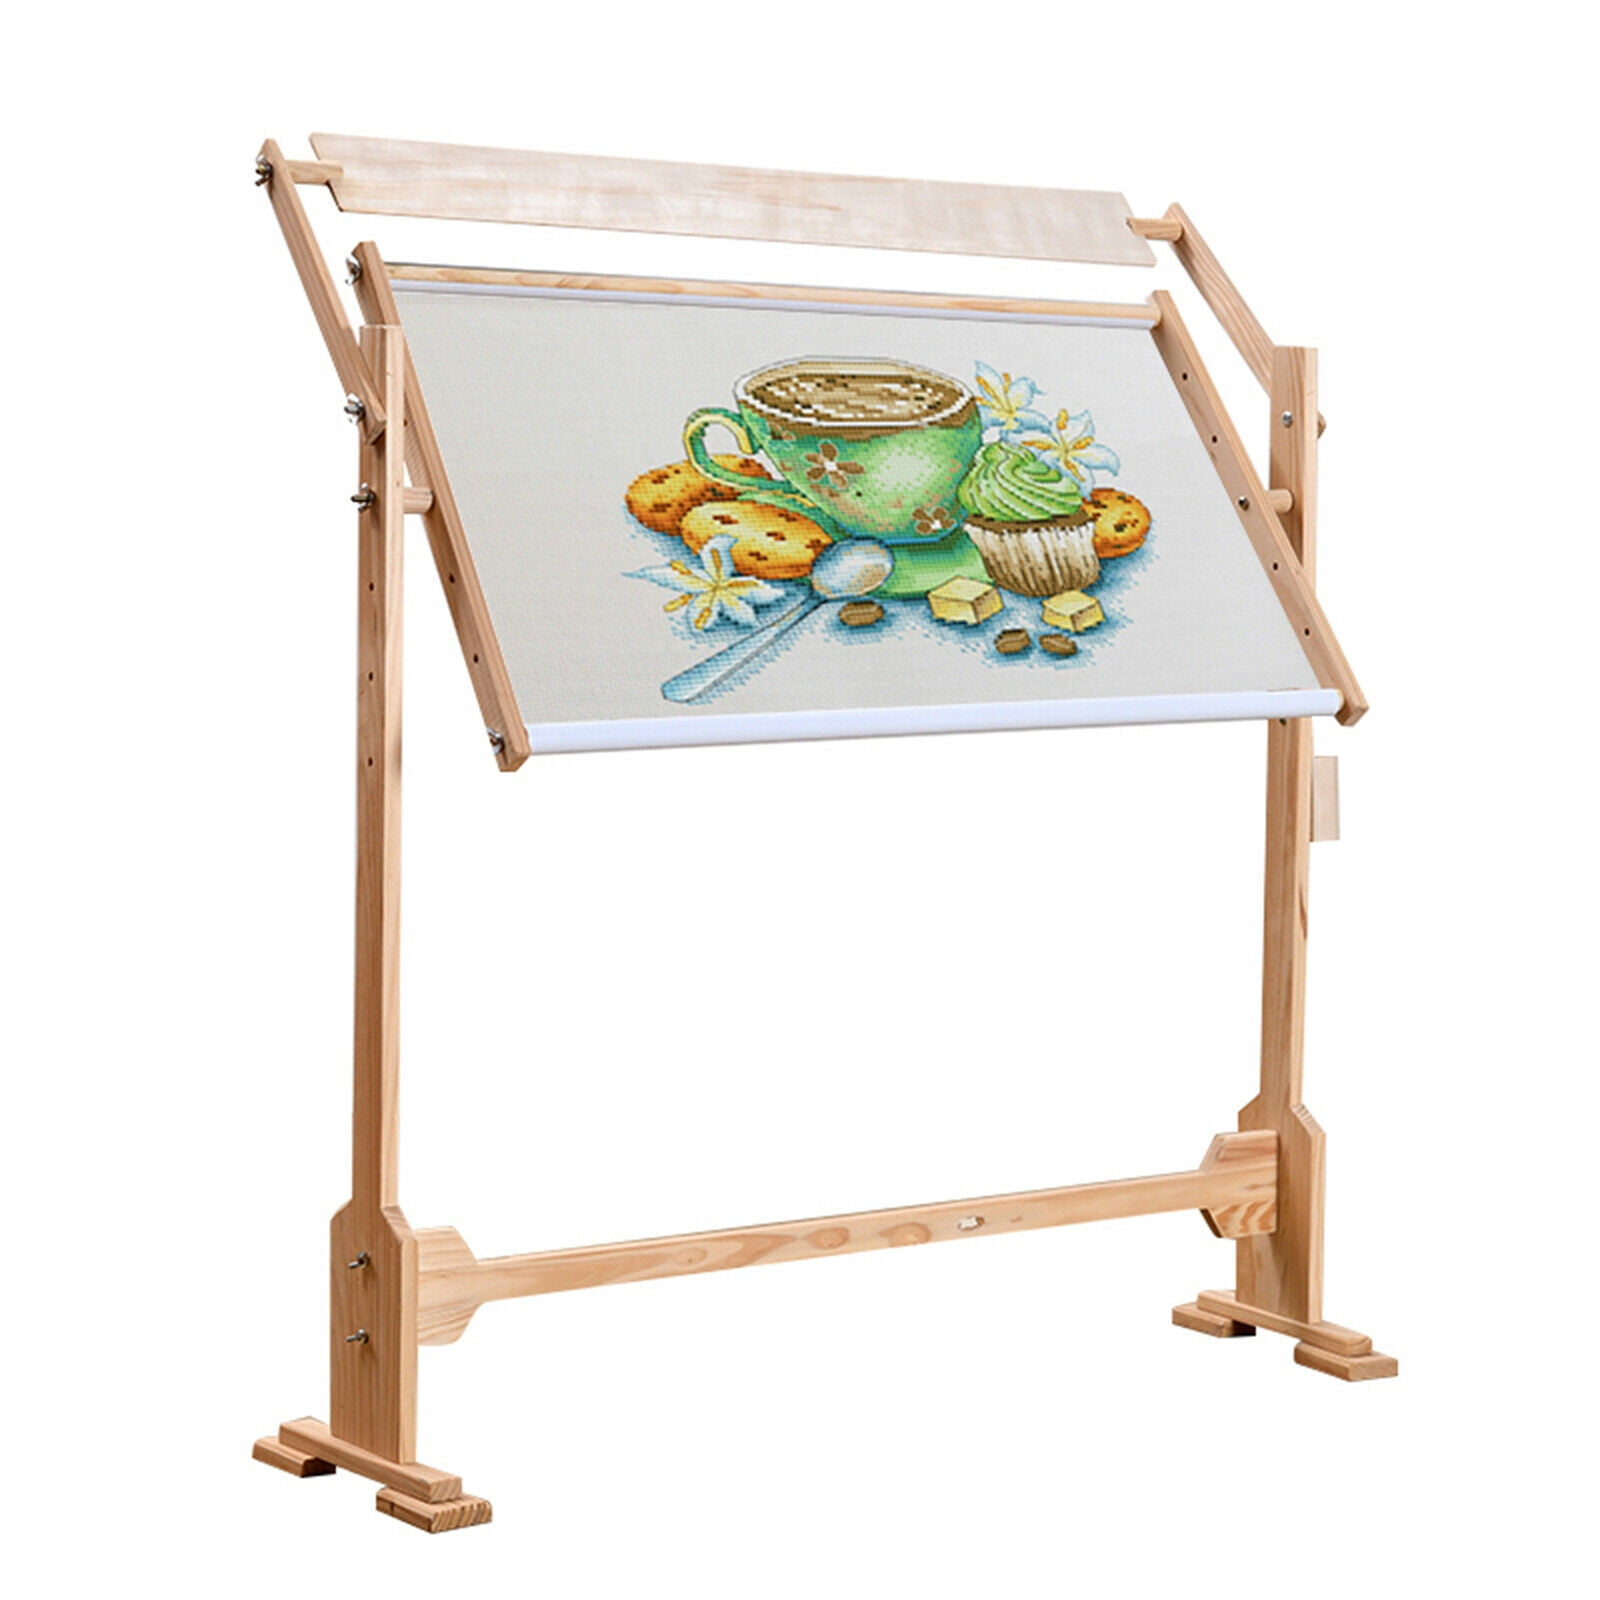 Adjustable Wooden Embroidery Frame Stand Cross Stitch Floor Stand,Needlework Lap Frame, Baifeng Cross Stitch Frame Stand